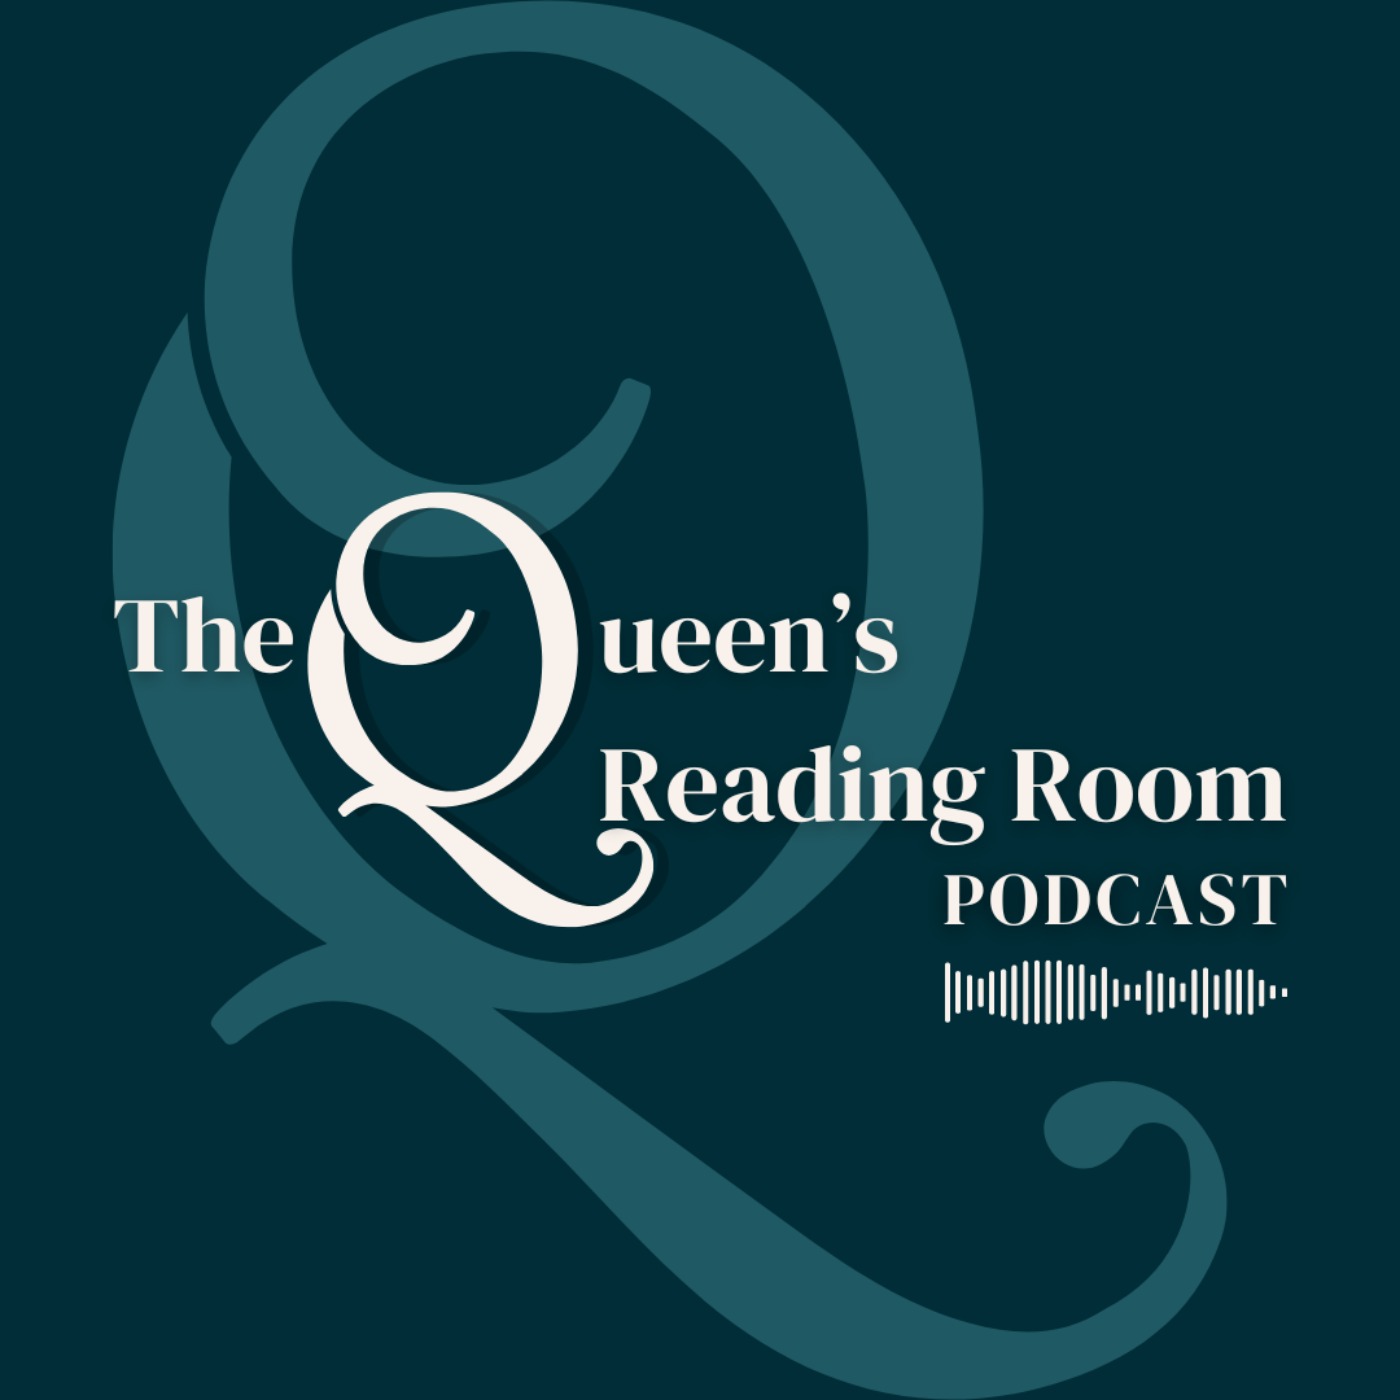 The Queen's Reading Room Podcast podcast show image